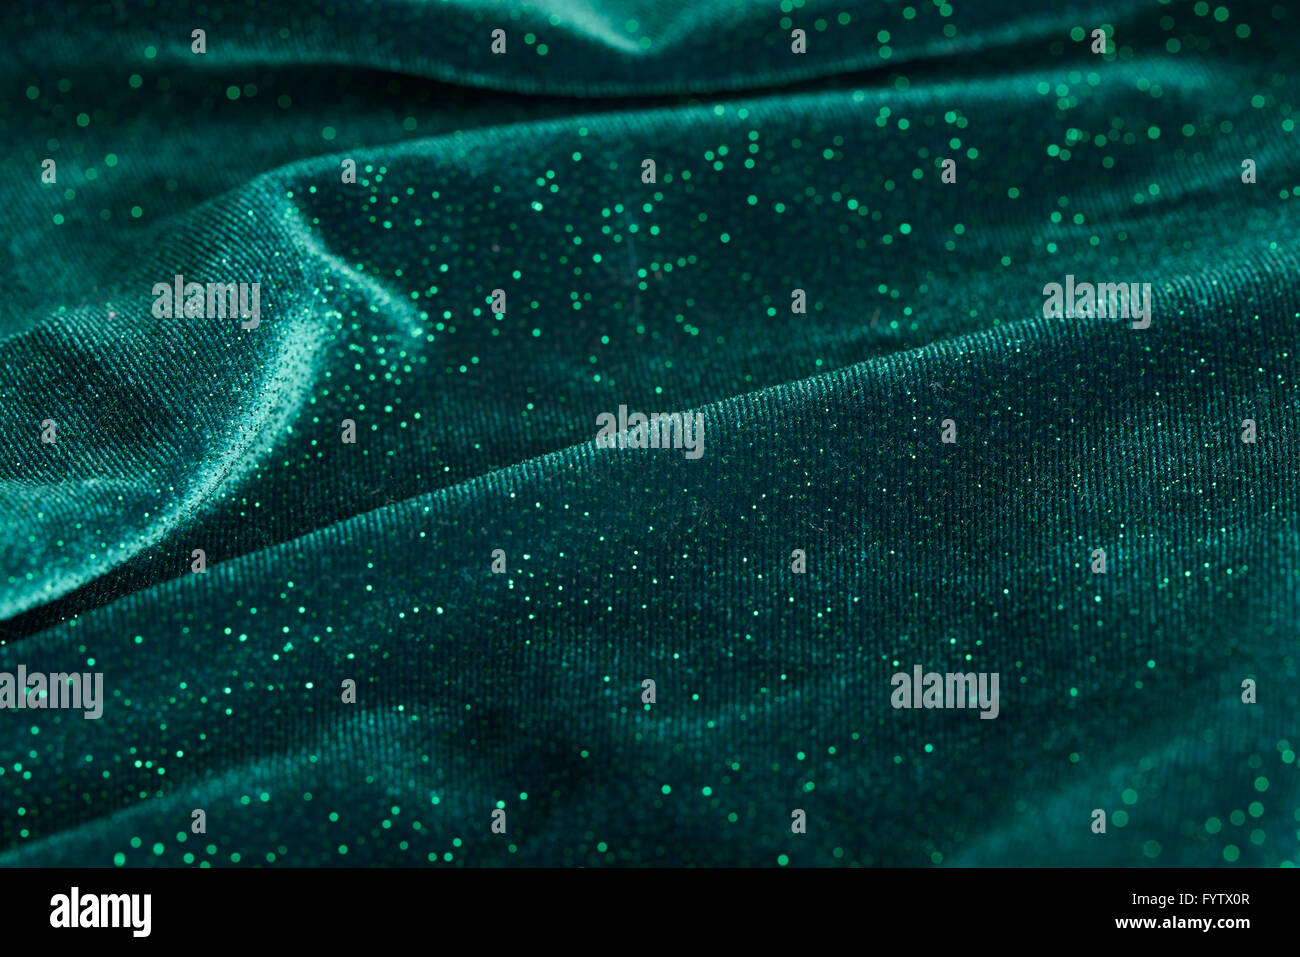 An abstract shot of wavy green fabric of a dress with glitter on it. Stock Photo